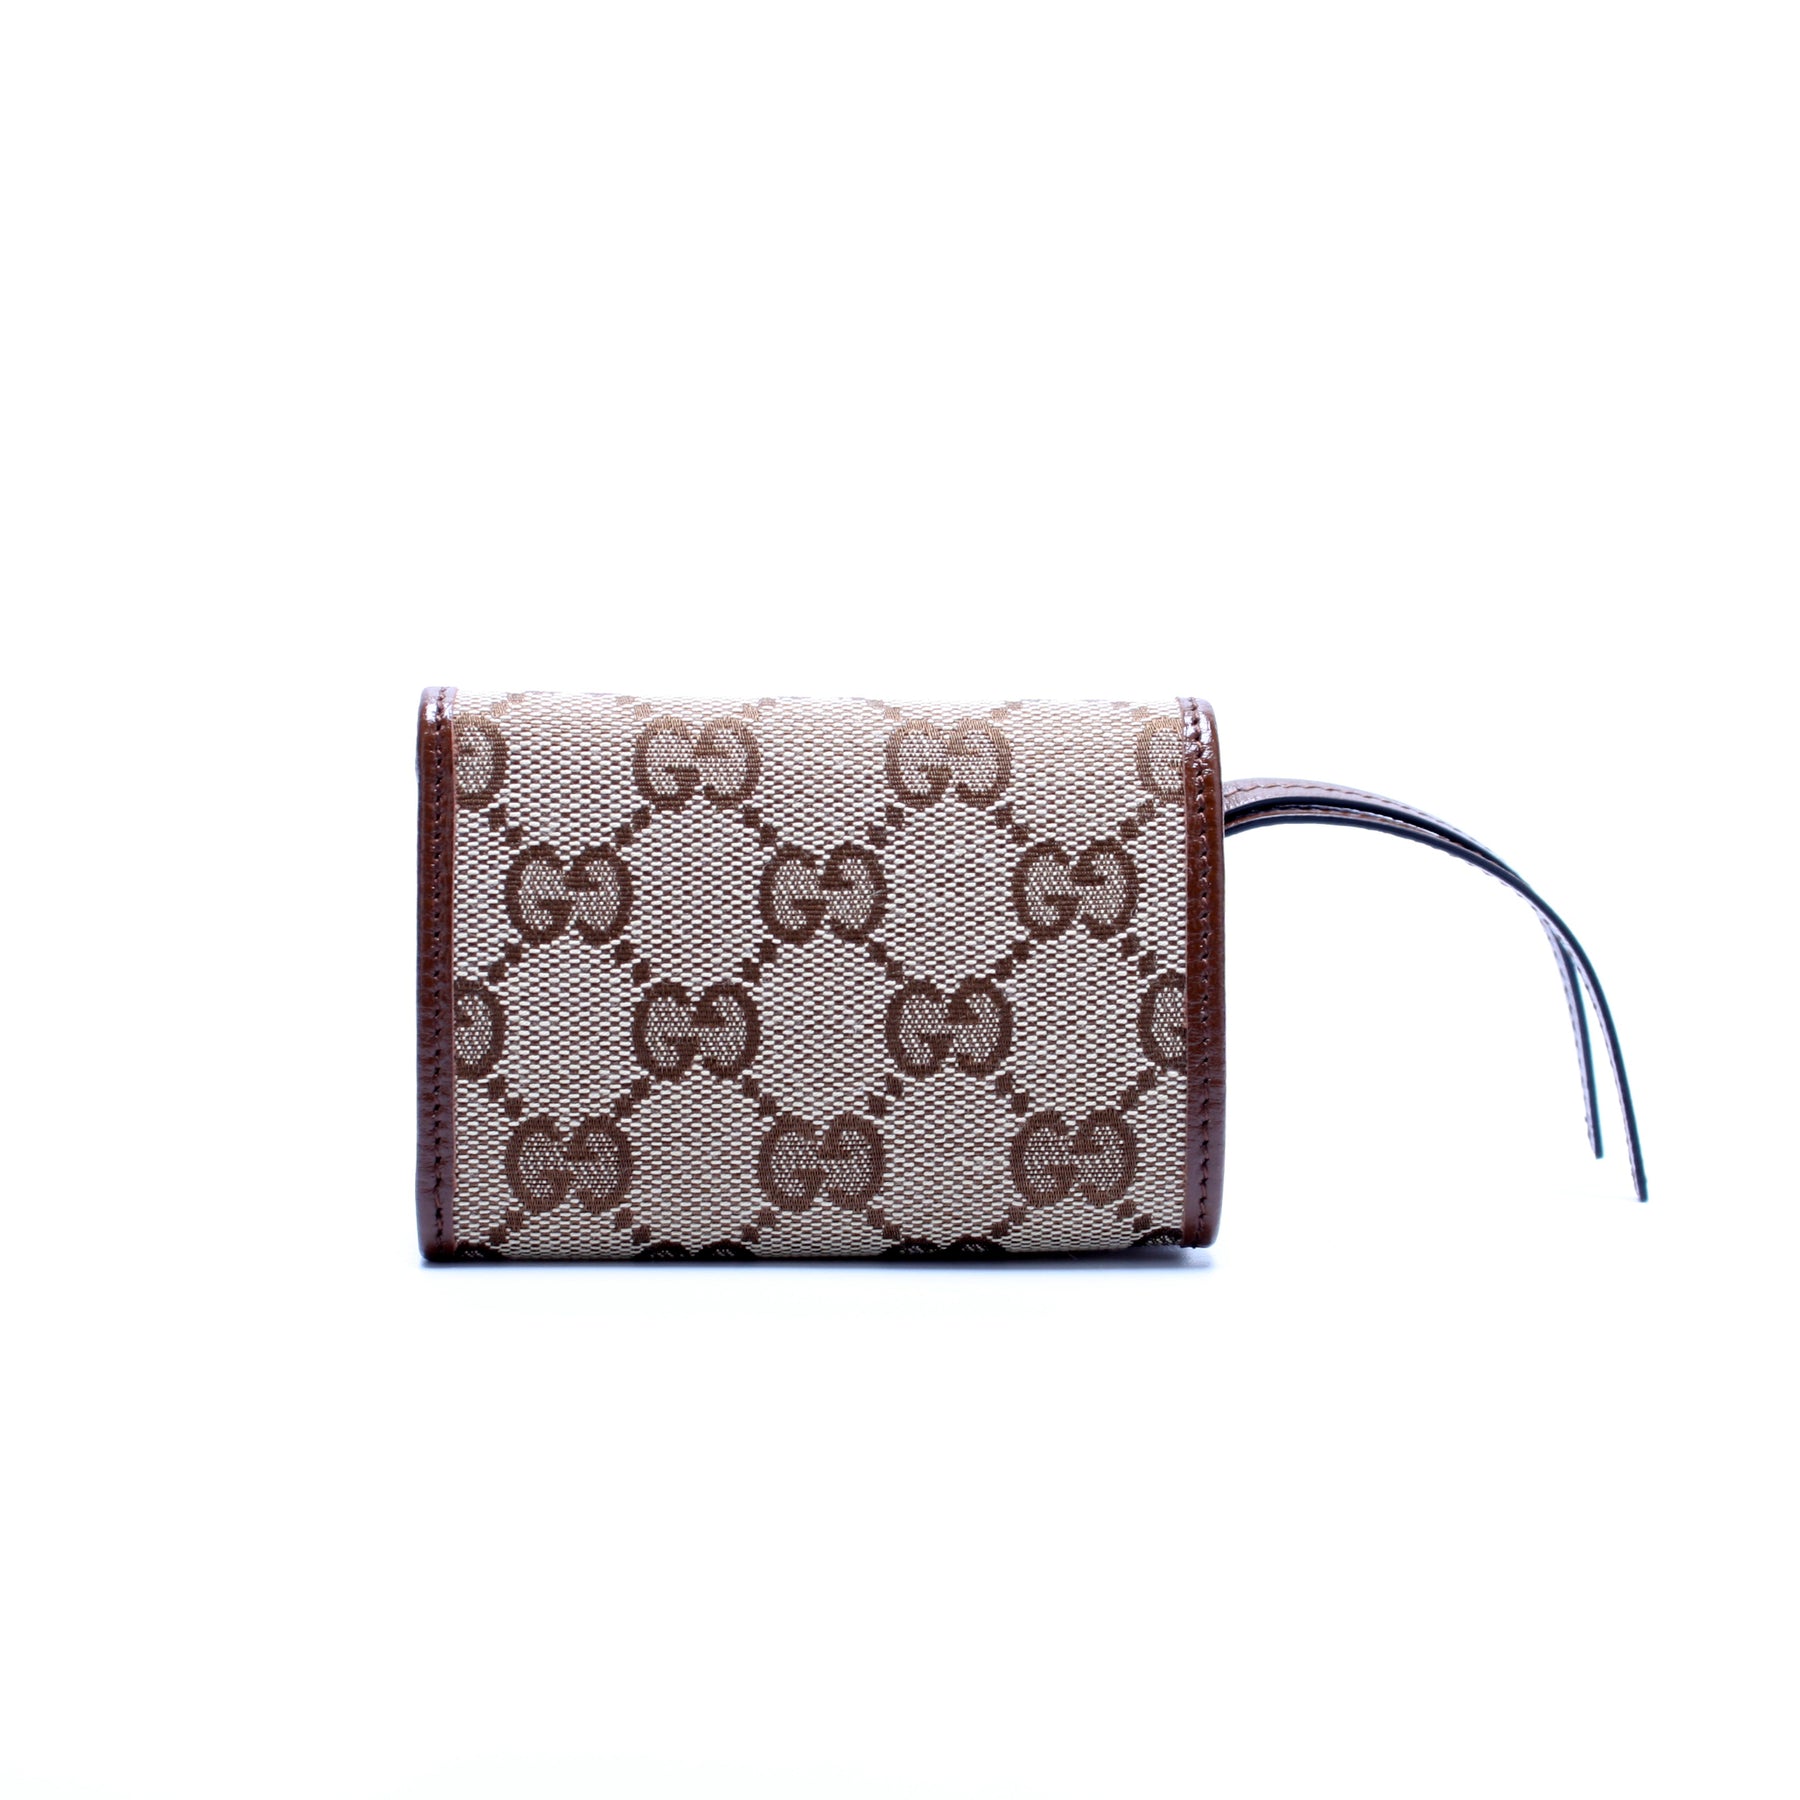 gucci and louis vuitton collab